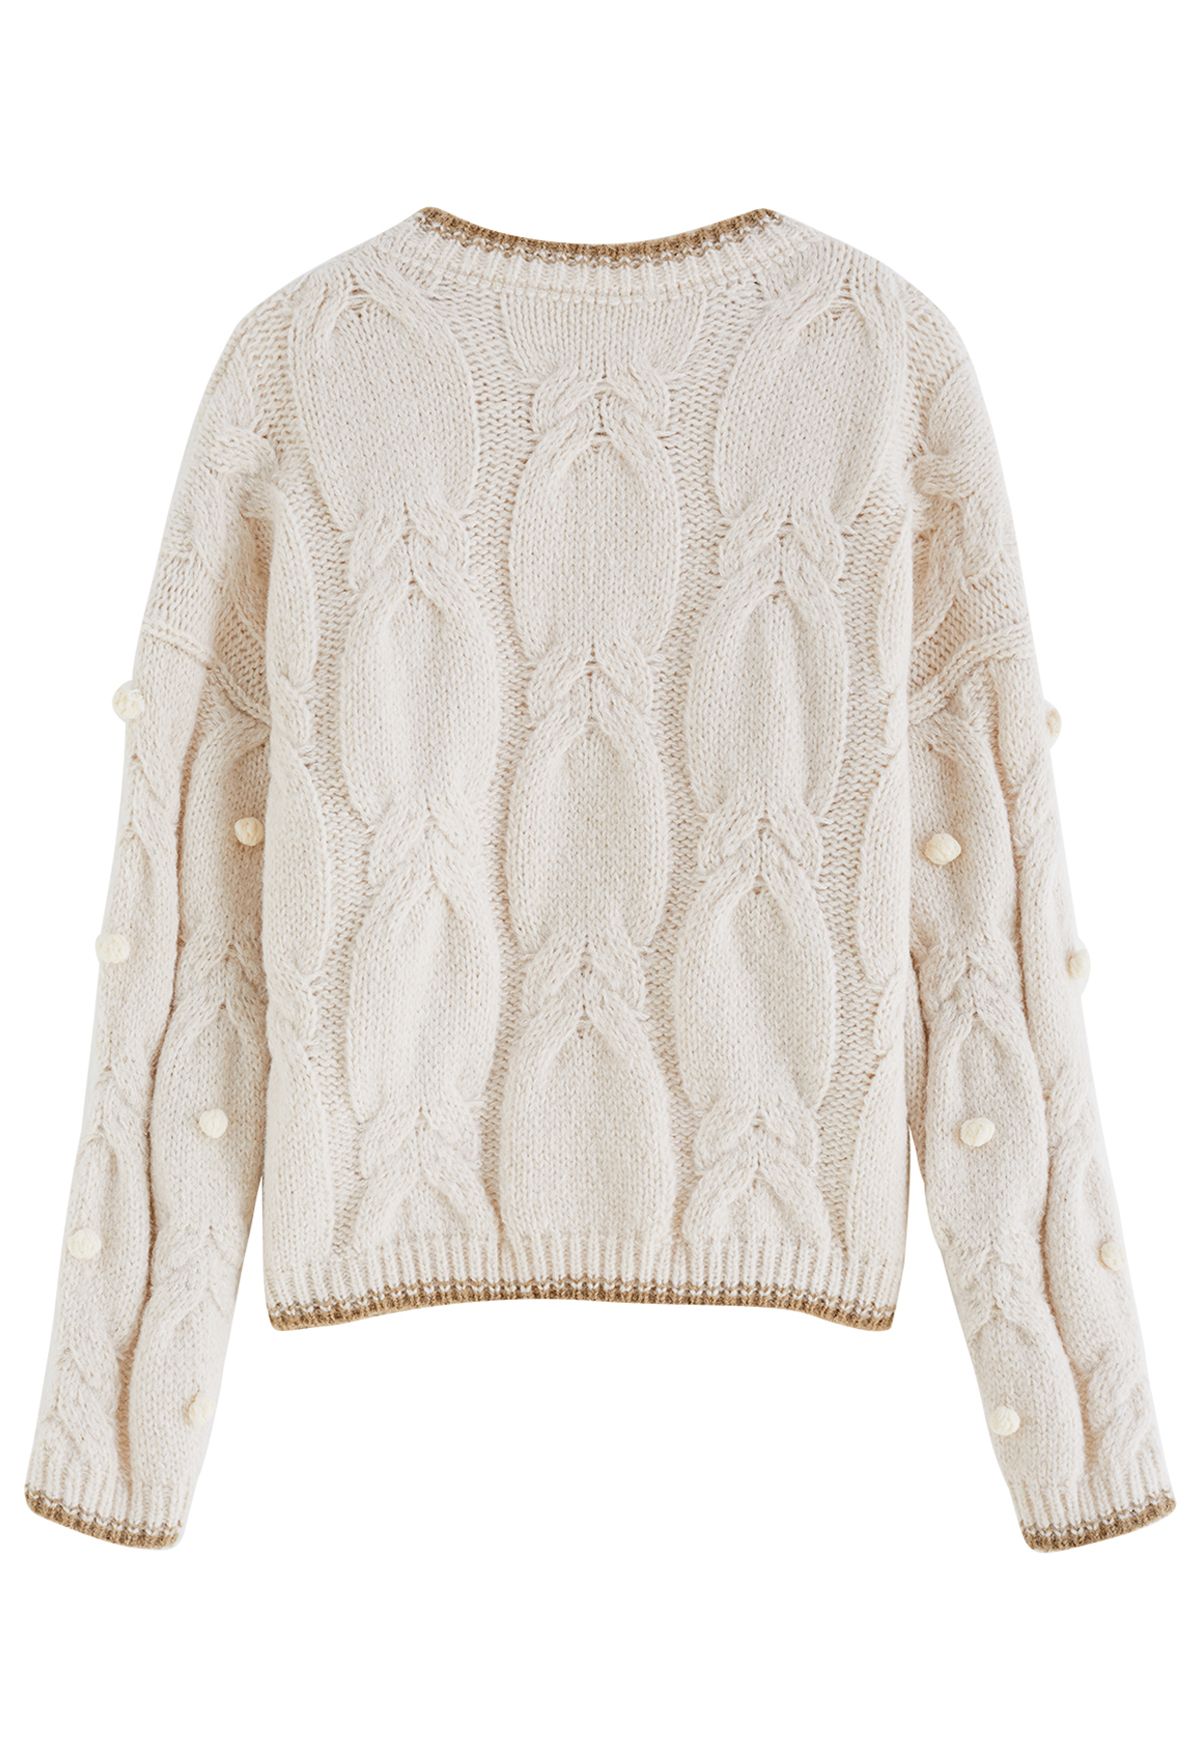 Contrast Edge Pom-Pom Cable Knit Sweater in Ivory - Retro, Indie and ...